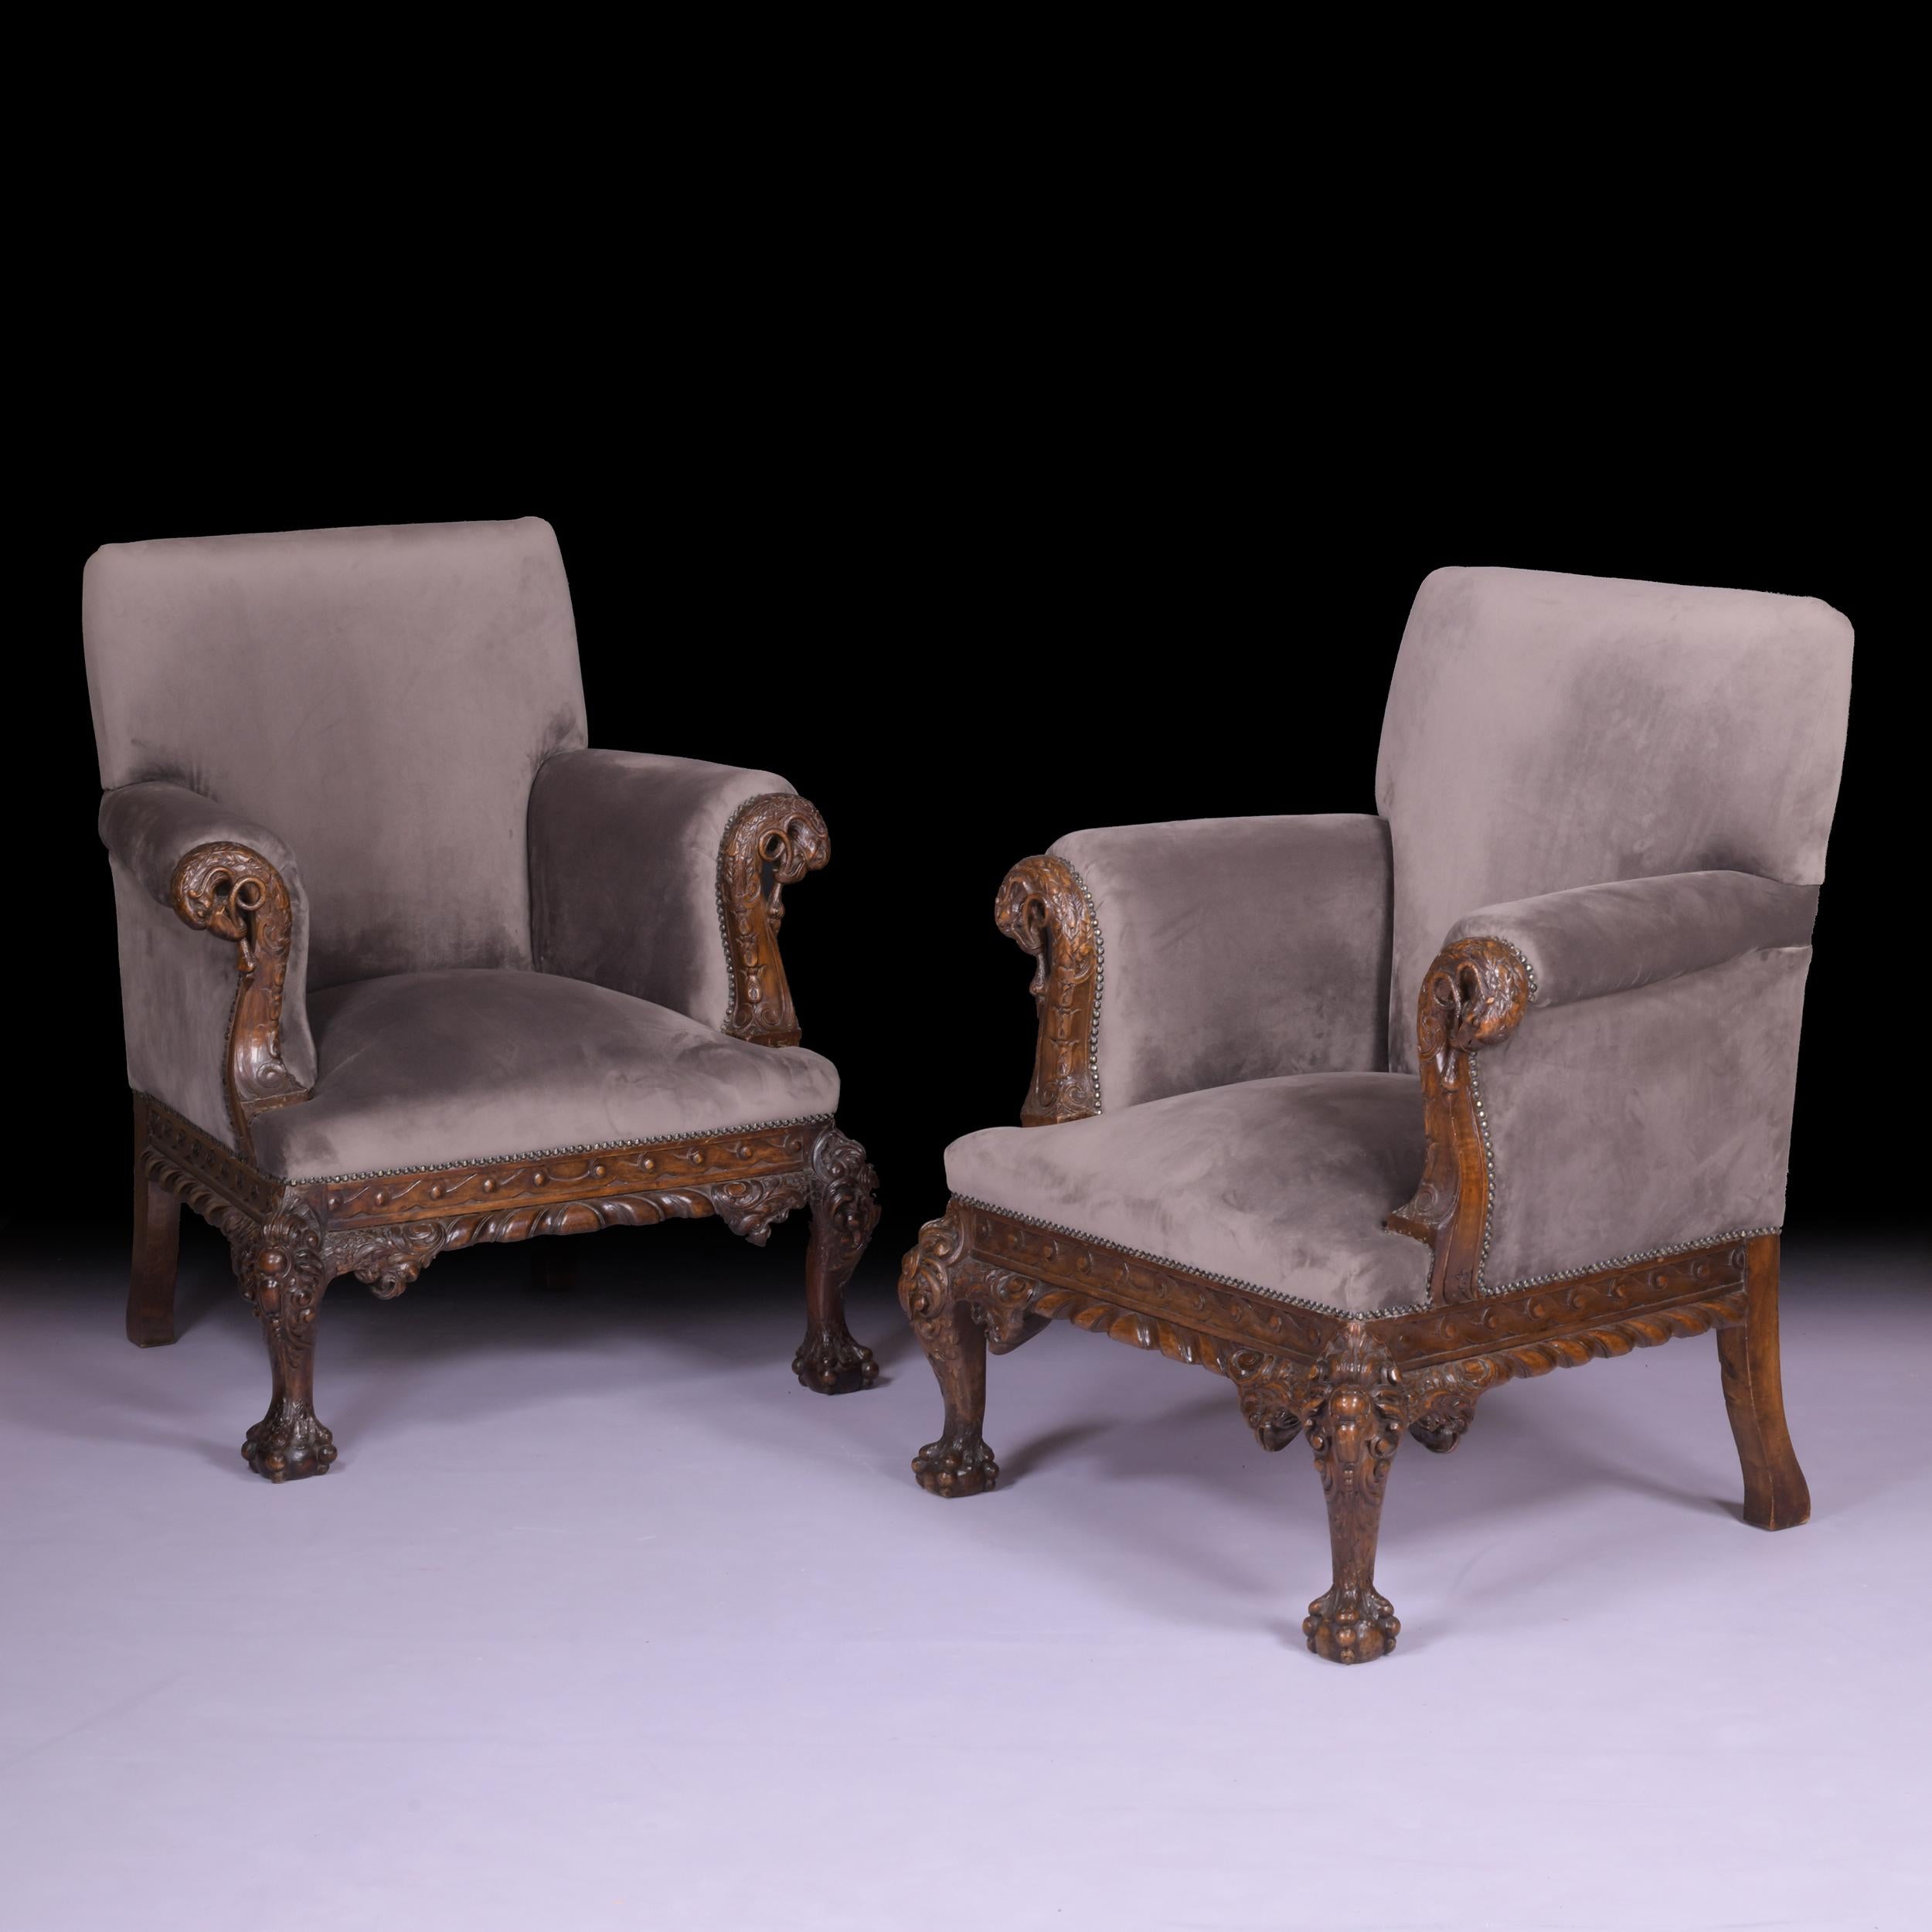 A very fine pair of 19th century Irish mahogany framed armchairs, with rectangular back and out-scrolling arms, covered in a grey velvet fabric, above an acanthus scroll apron, on heavy ball and claw feet.

Circa 1880

Irish

Seat dimensions: